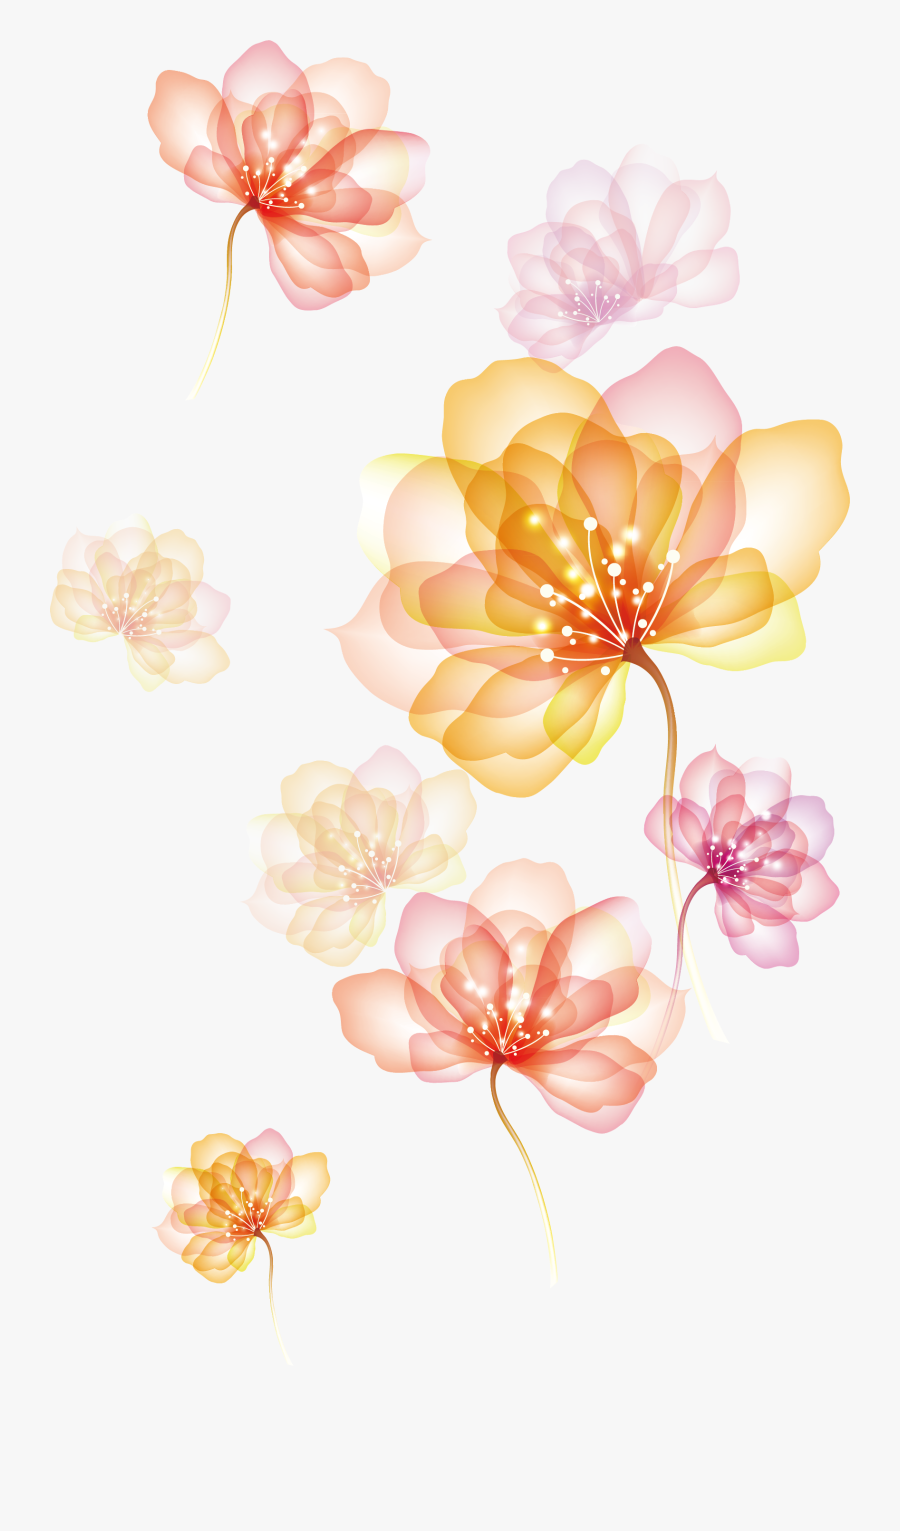 Of Spreading Flowers Effect Hd Image Free Png Clipart - Transparent Flower Effect Png, Transparent Clipart